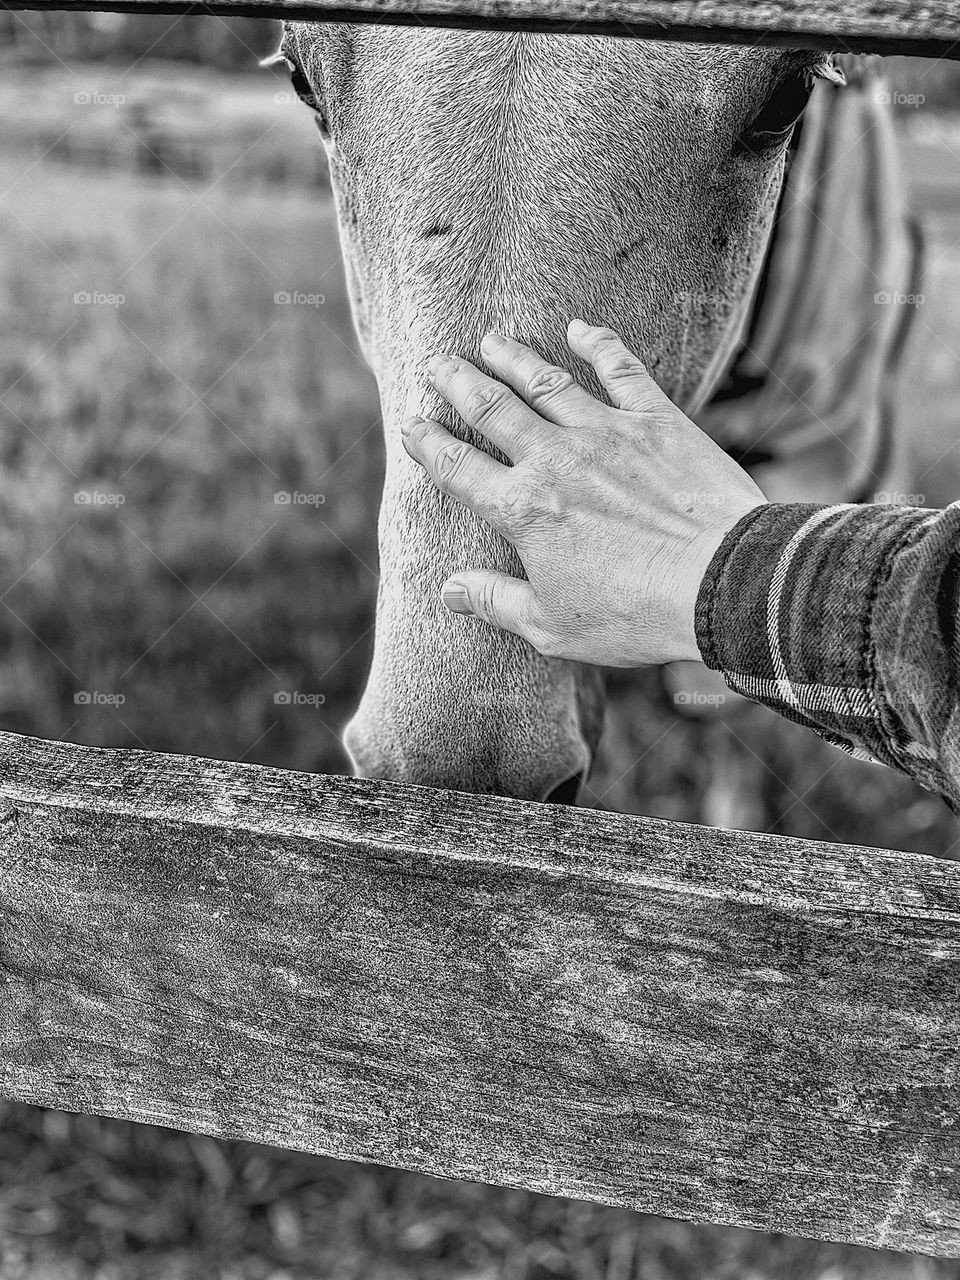 Woman’s hand gently touching horse, black and white image of hand on a horse’s face, moments of peace, moments of happiness, power of touch, power of feeling, early morning routines with horses 